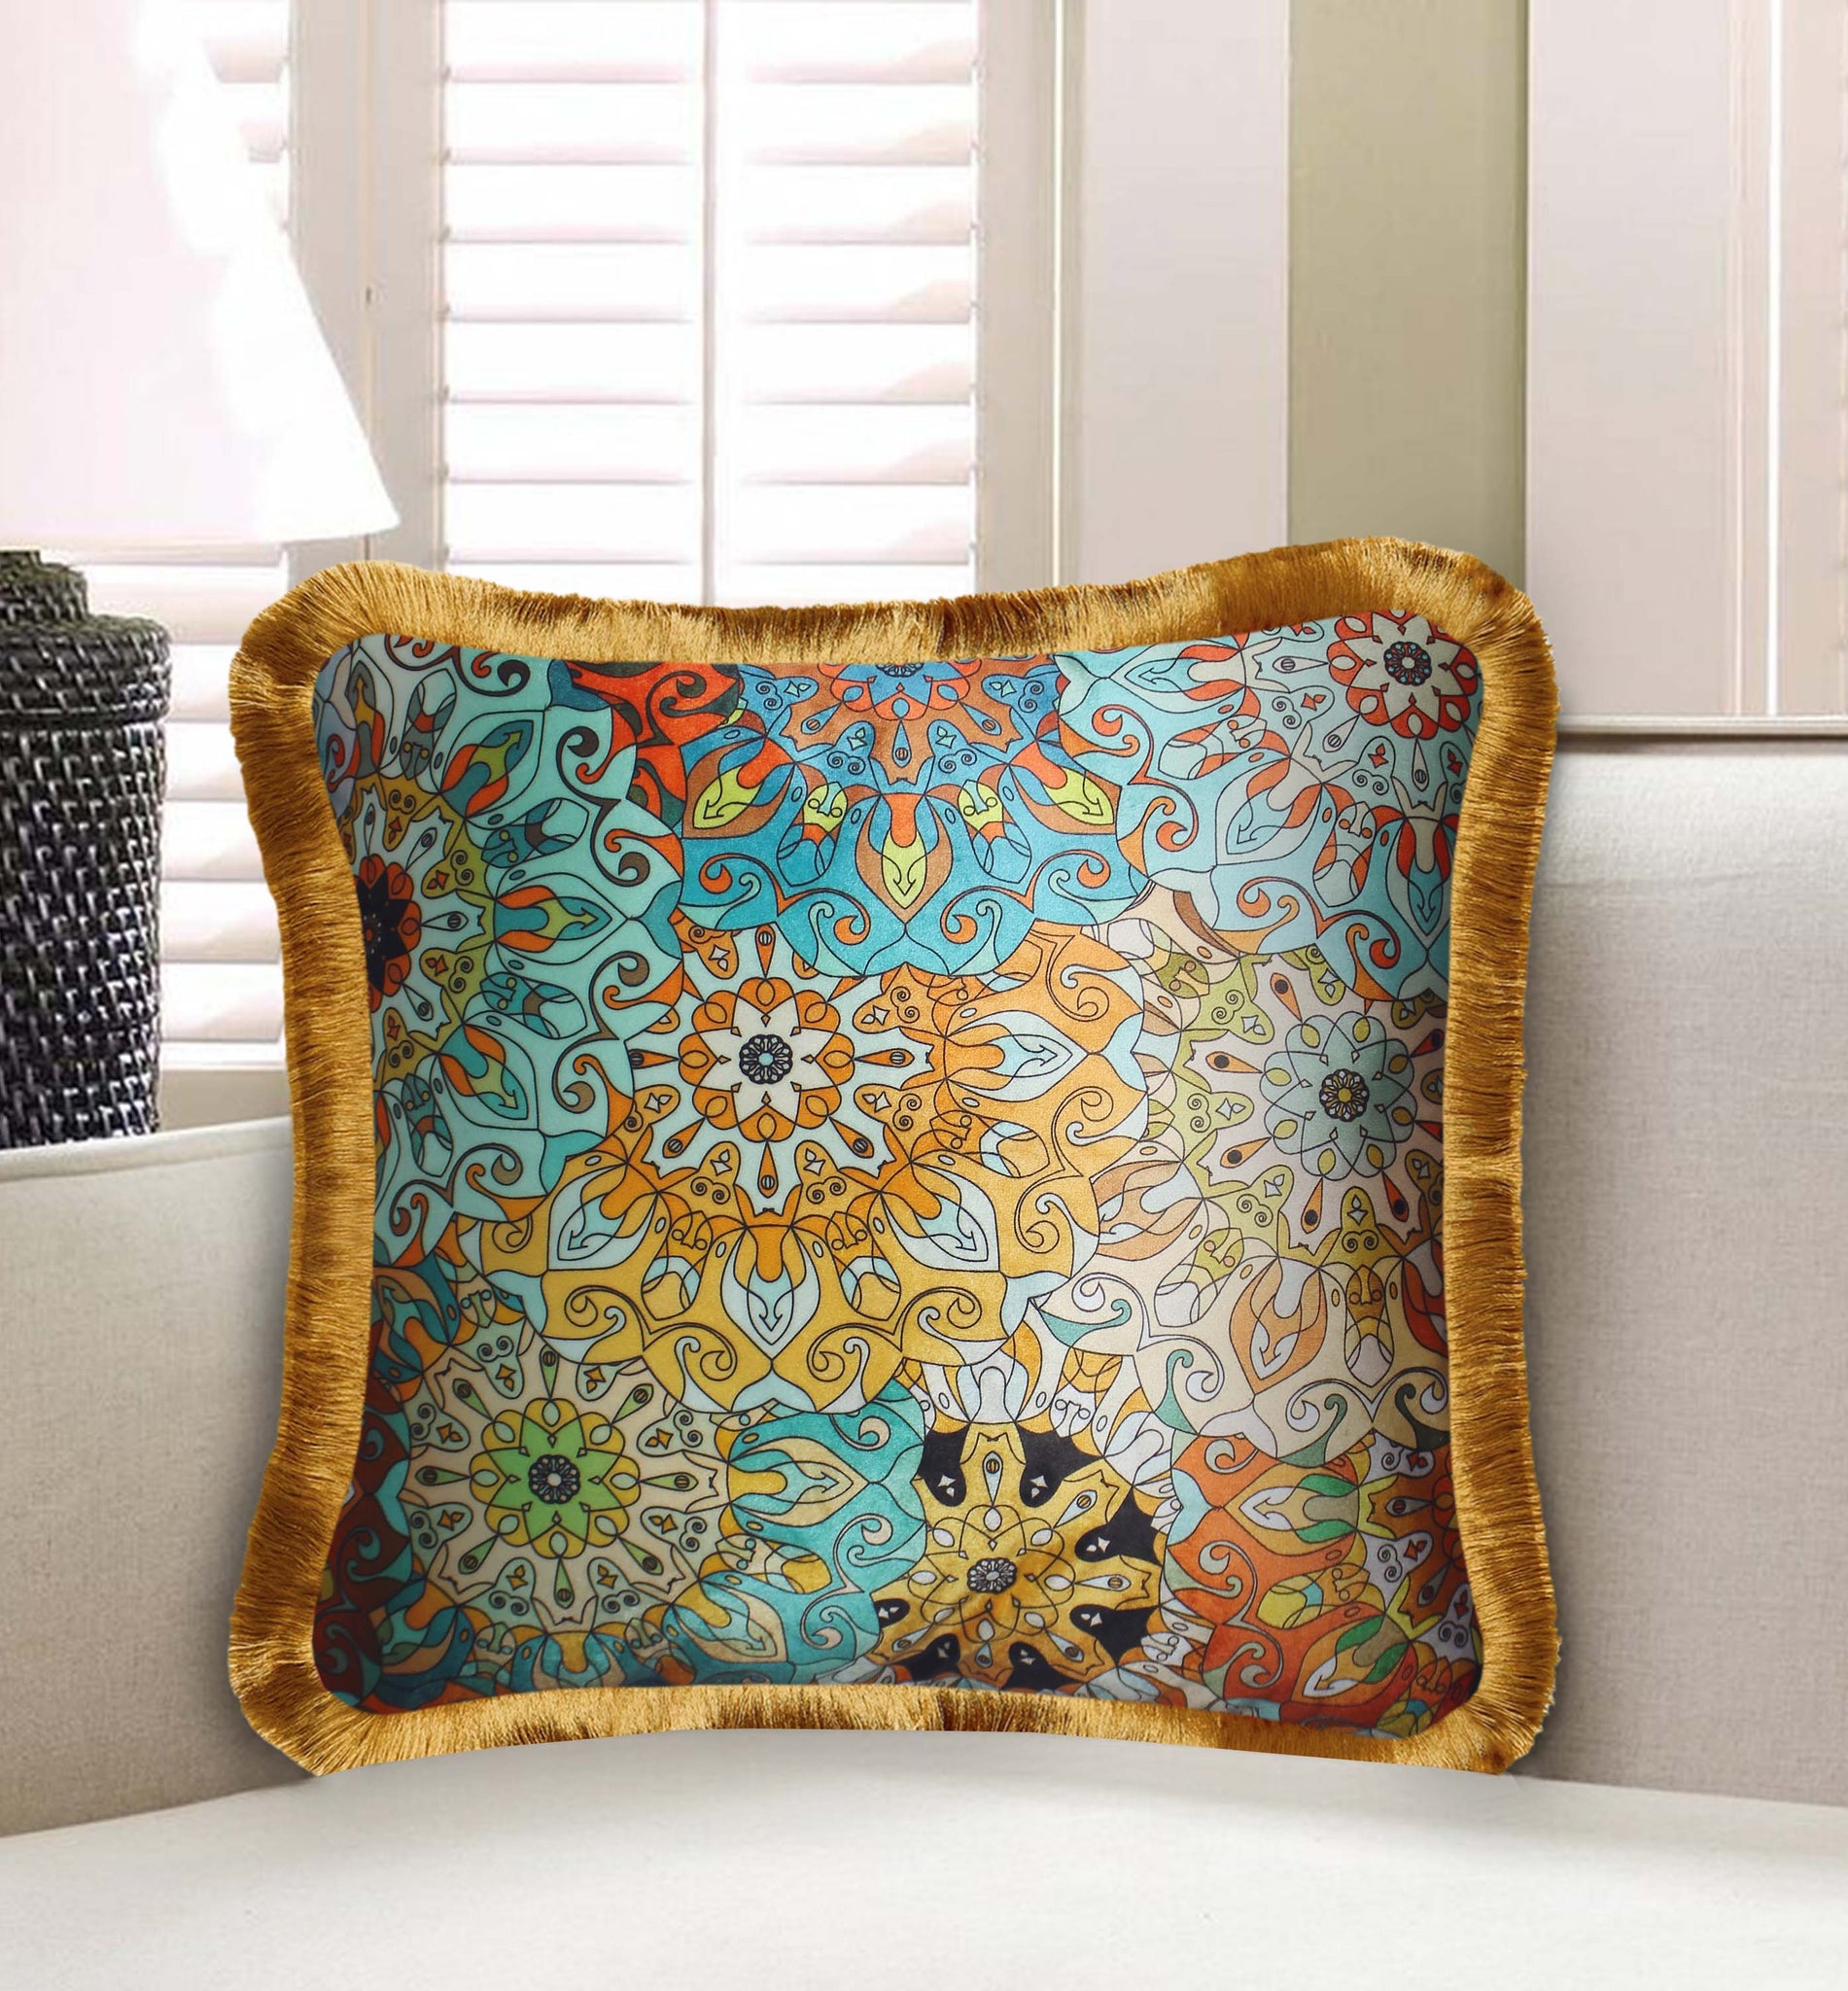 Velvet Cushion Cover Home Decor Abstract Art Decorative pillowcase Colorful Geometric Floral Decor Throw Pillow for Sofa Chair Bedroom Living Room Multi Color 45x45cm (18x18 Inches)